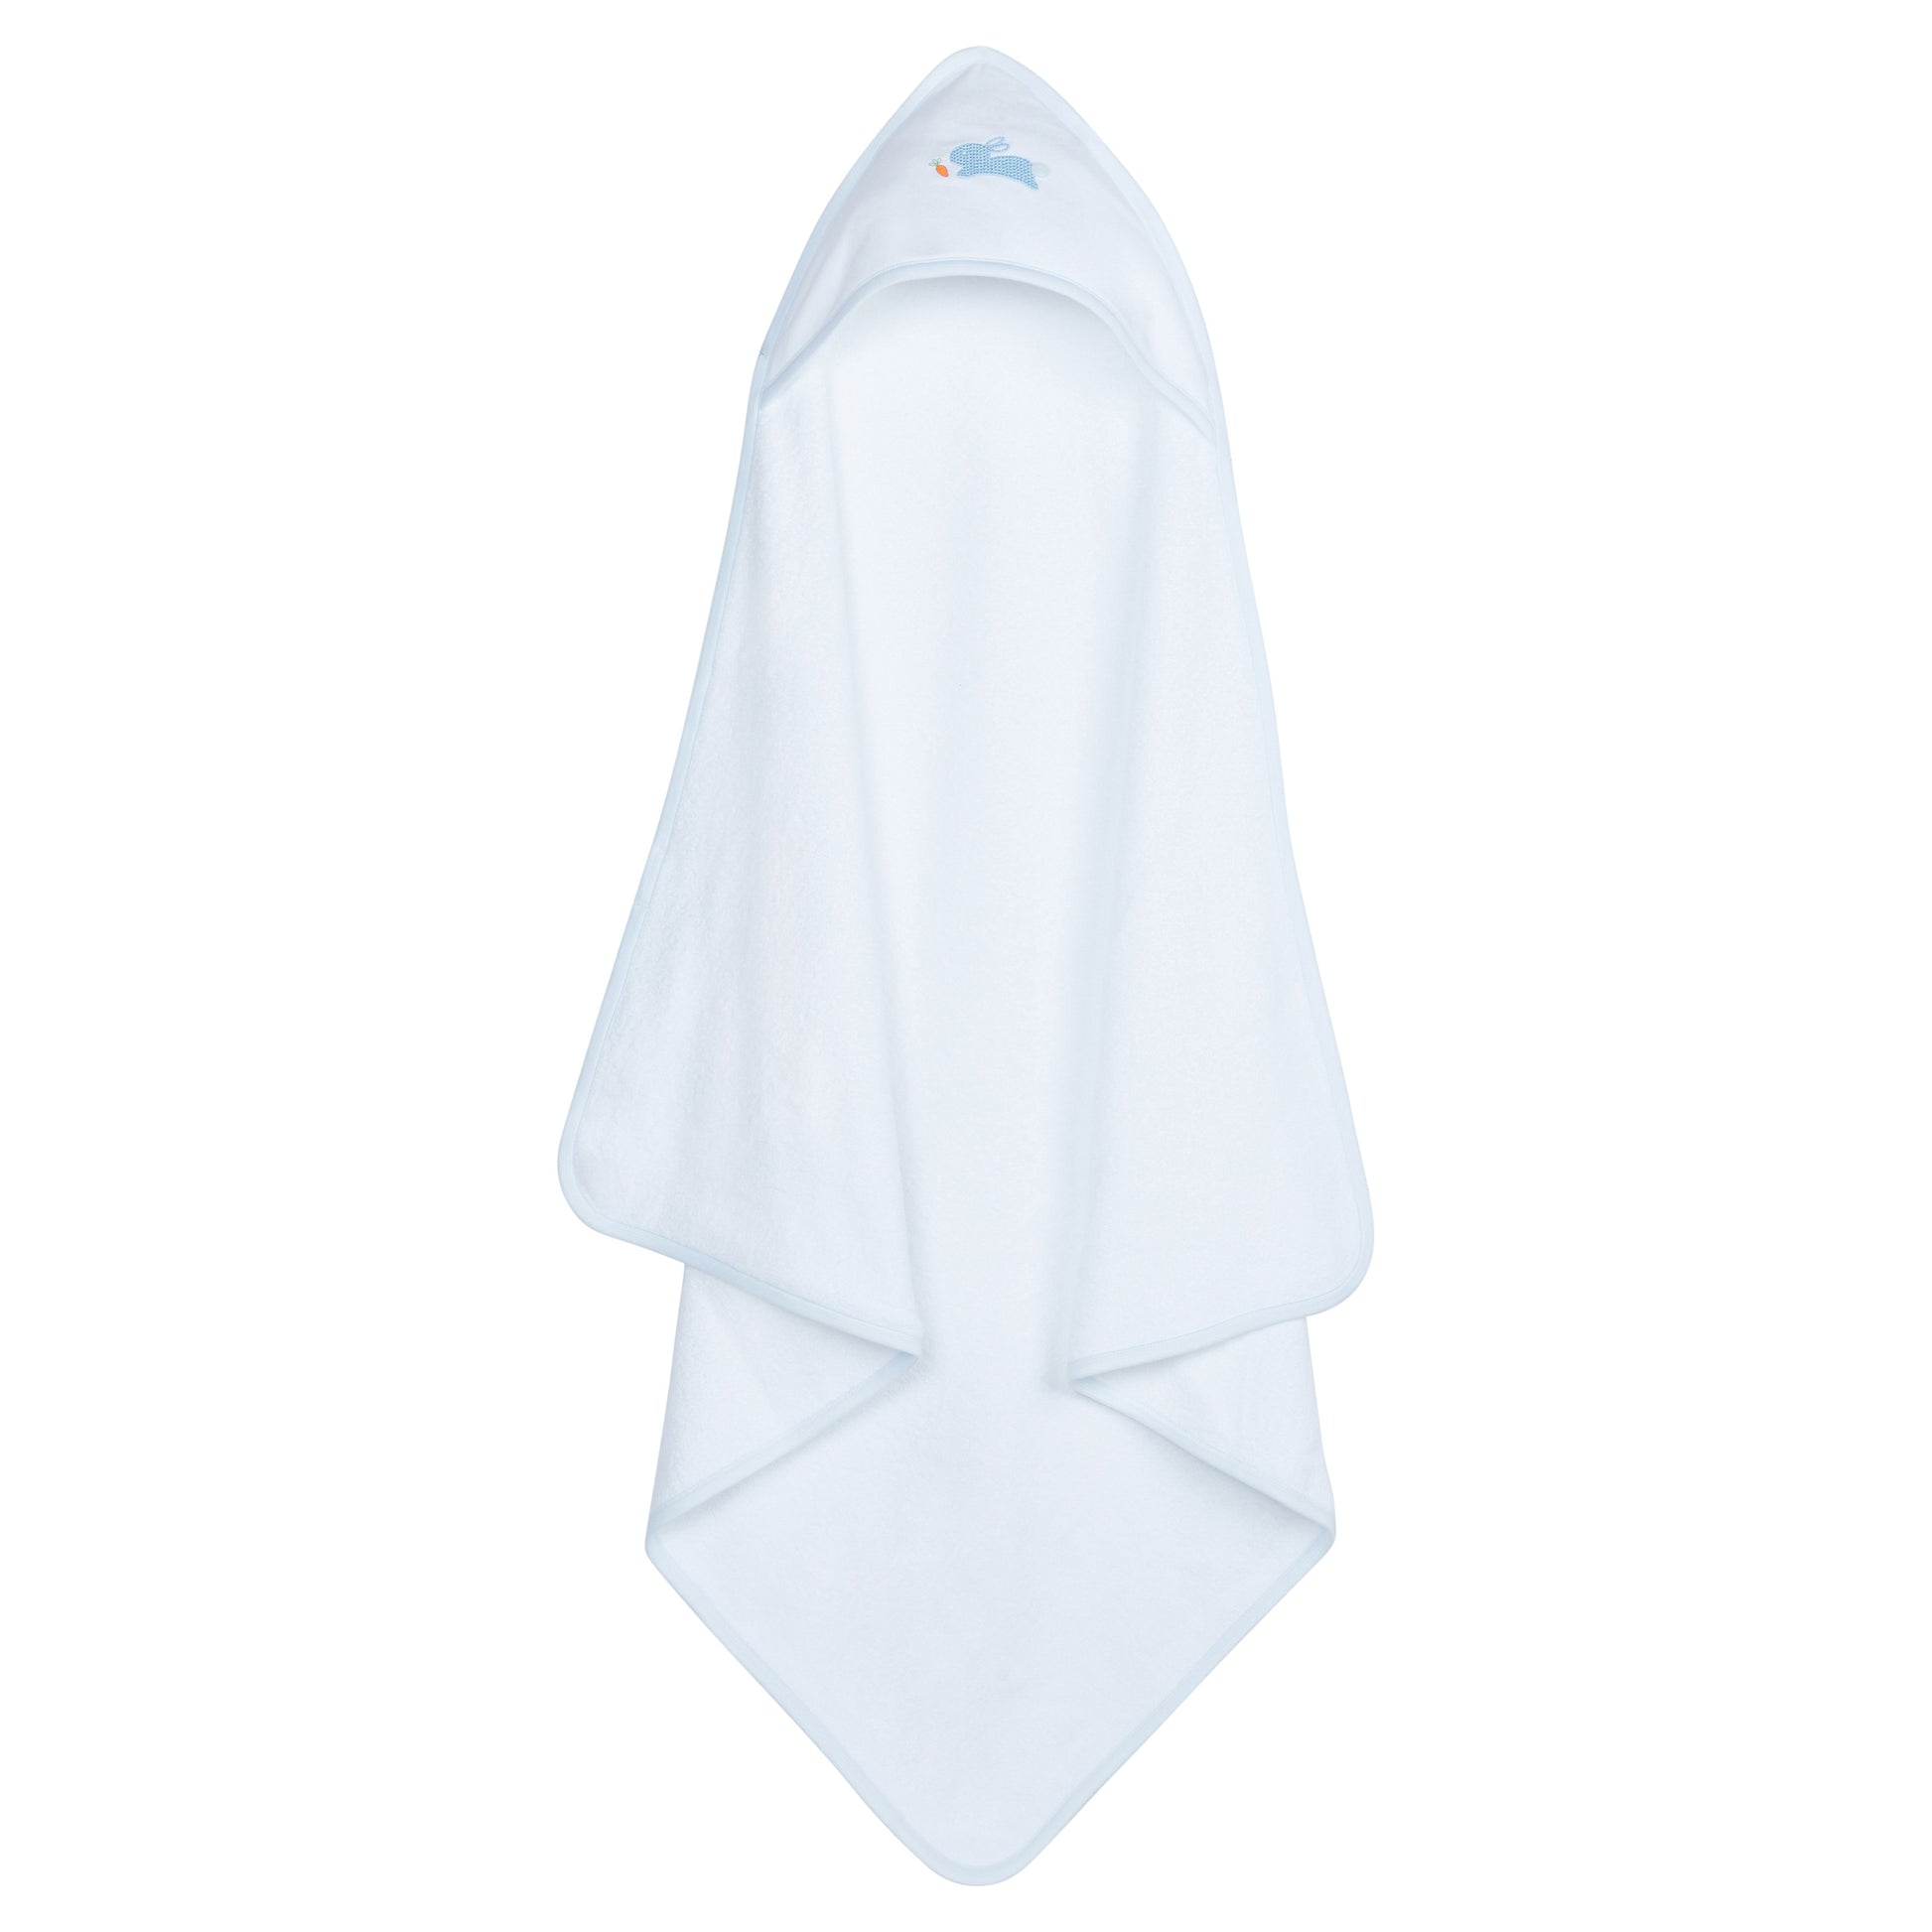 Little English Hooded Towel - Blue Bunny